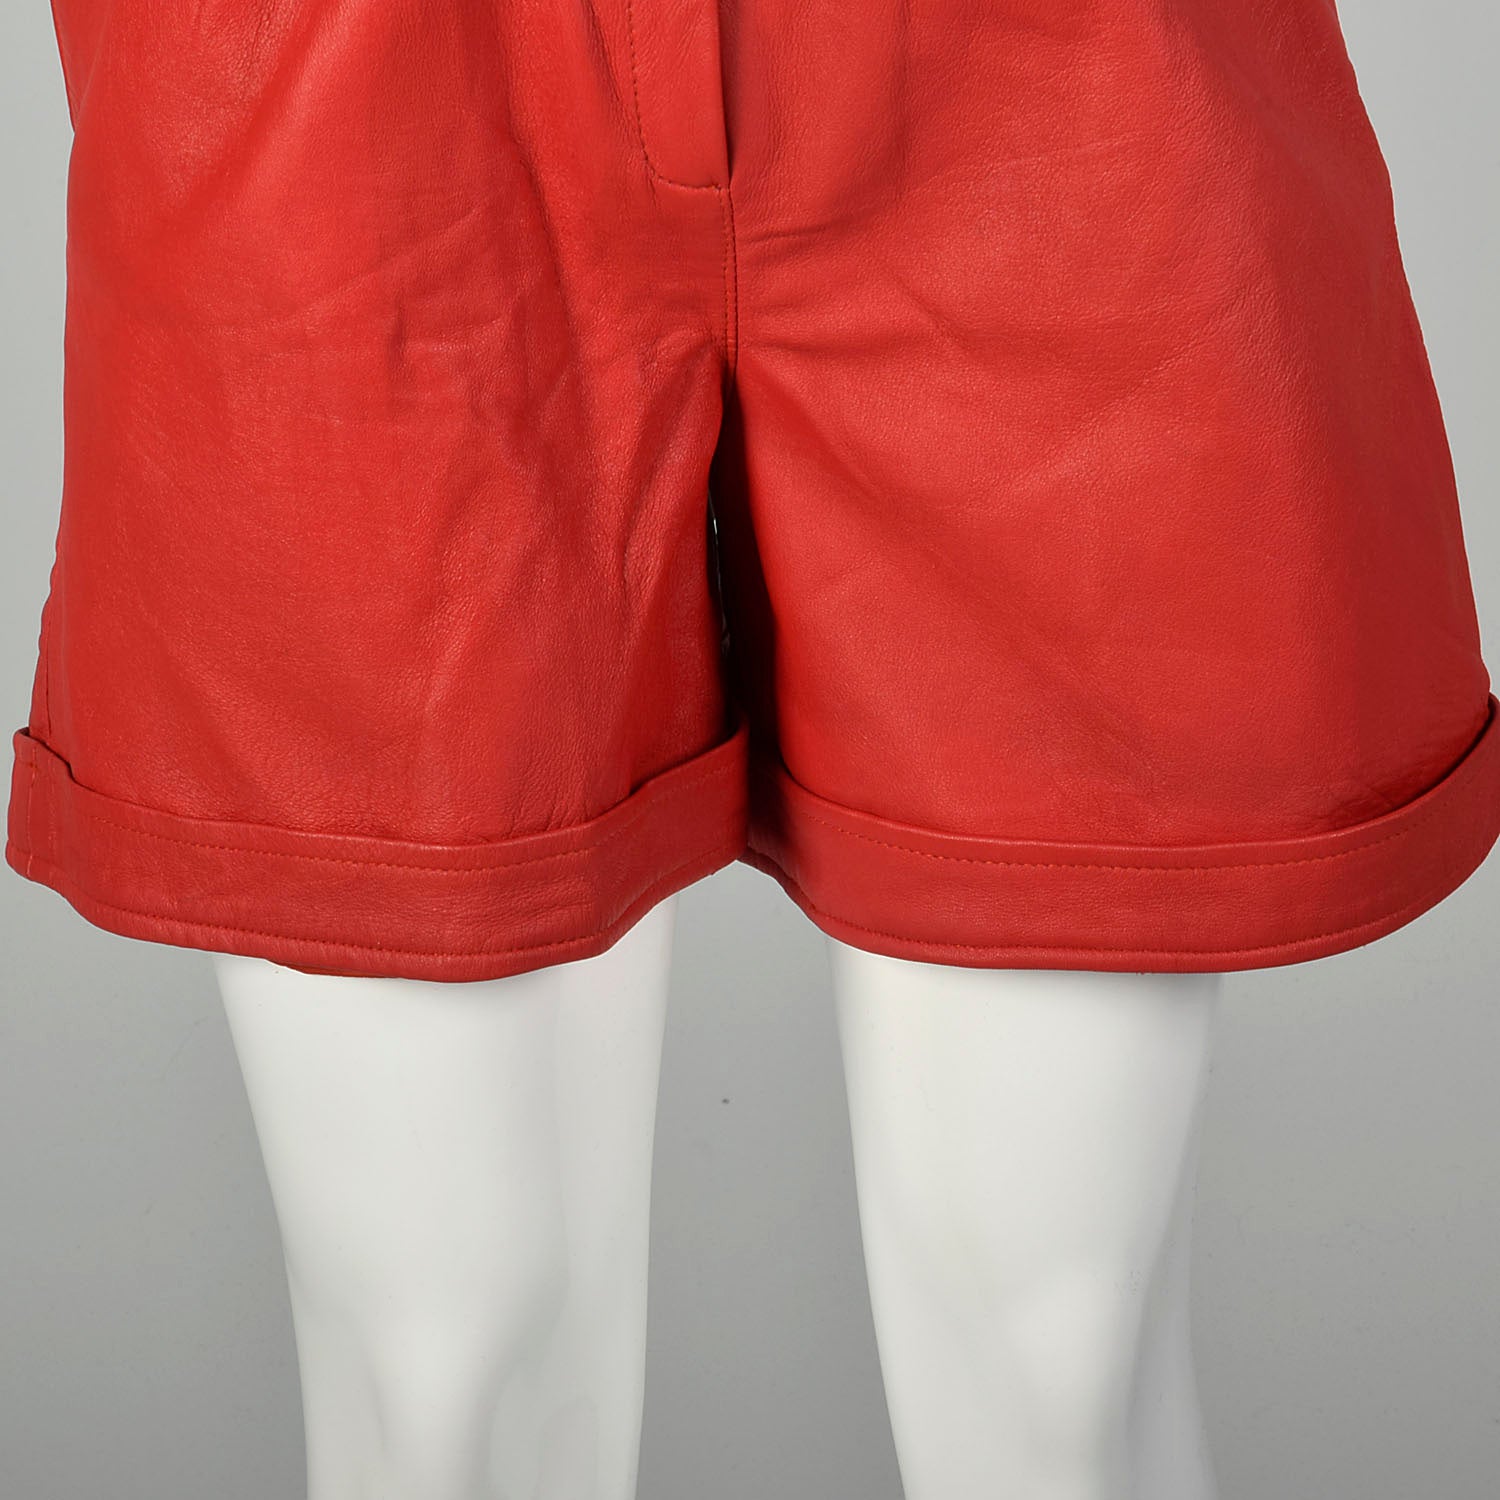 XS 1980s Red Leather Shorts Pleated Button Front Sexy Cuffed Bottoms